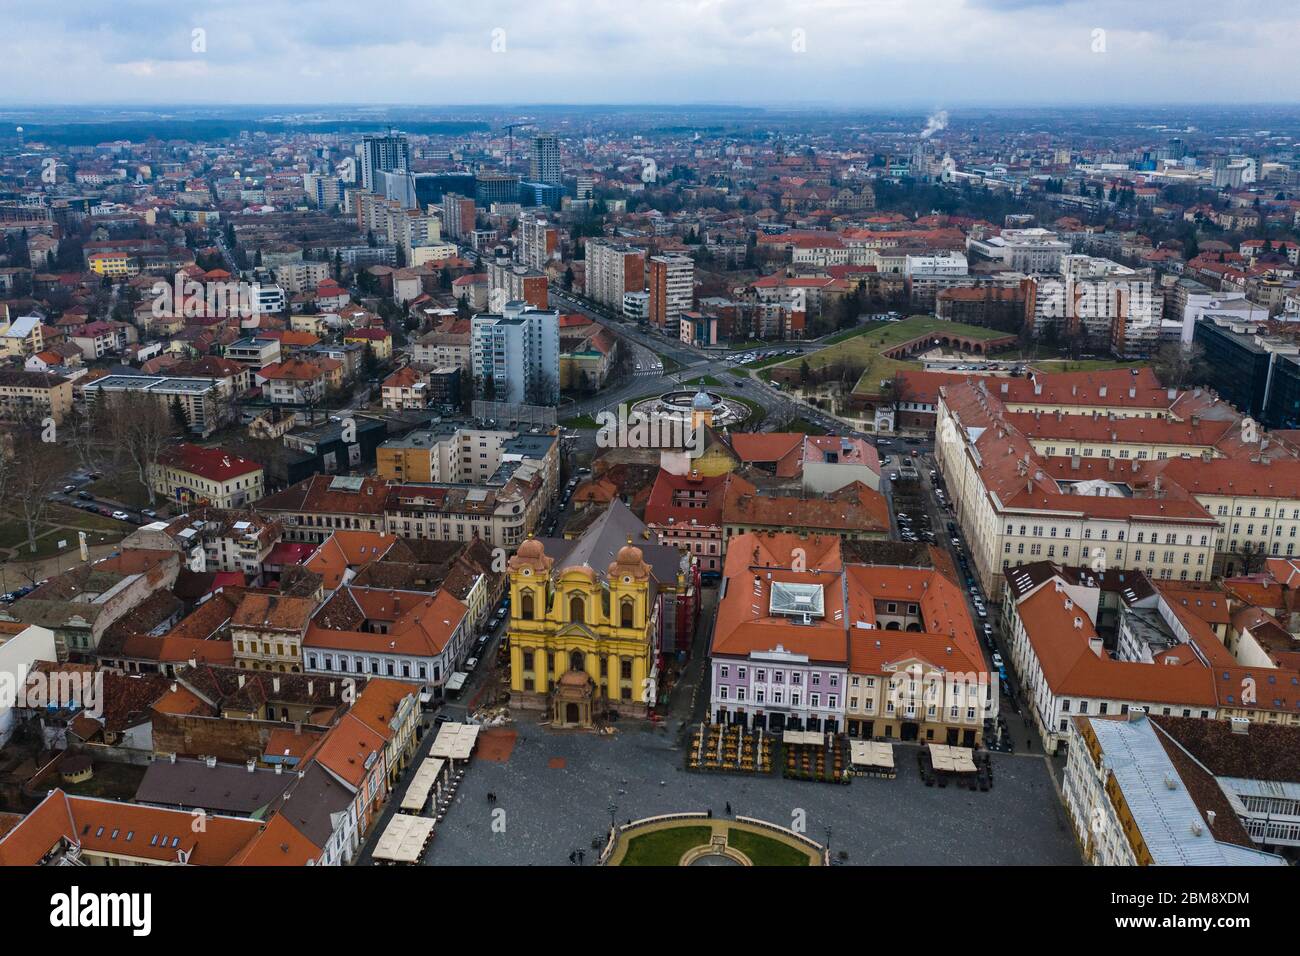 Metal line Merchandising Child Beautiful cloudy sunset over Union Square - Piata Unirii Timisoara. Aerial  view from Timisoara taken by a professional drone Stock Photo - Alamy